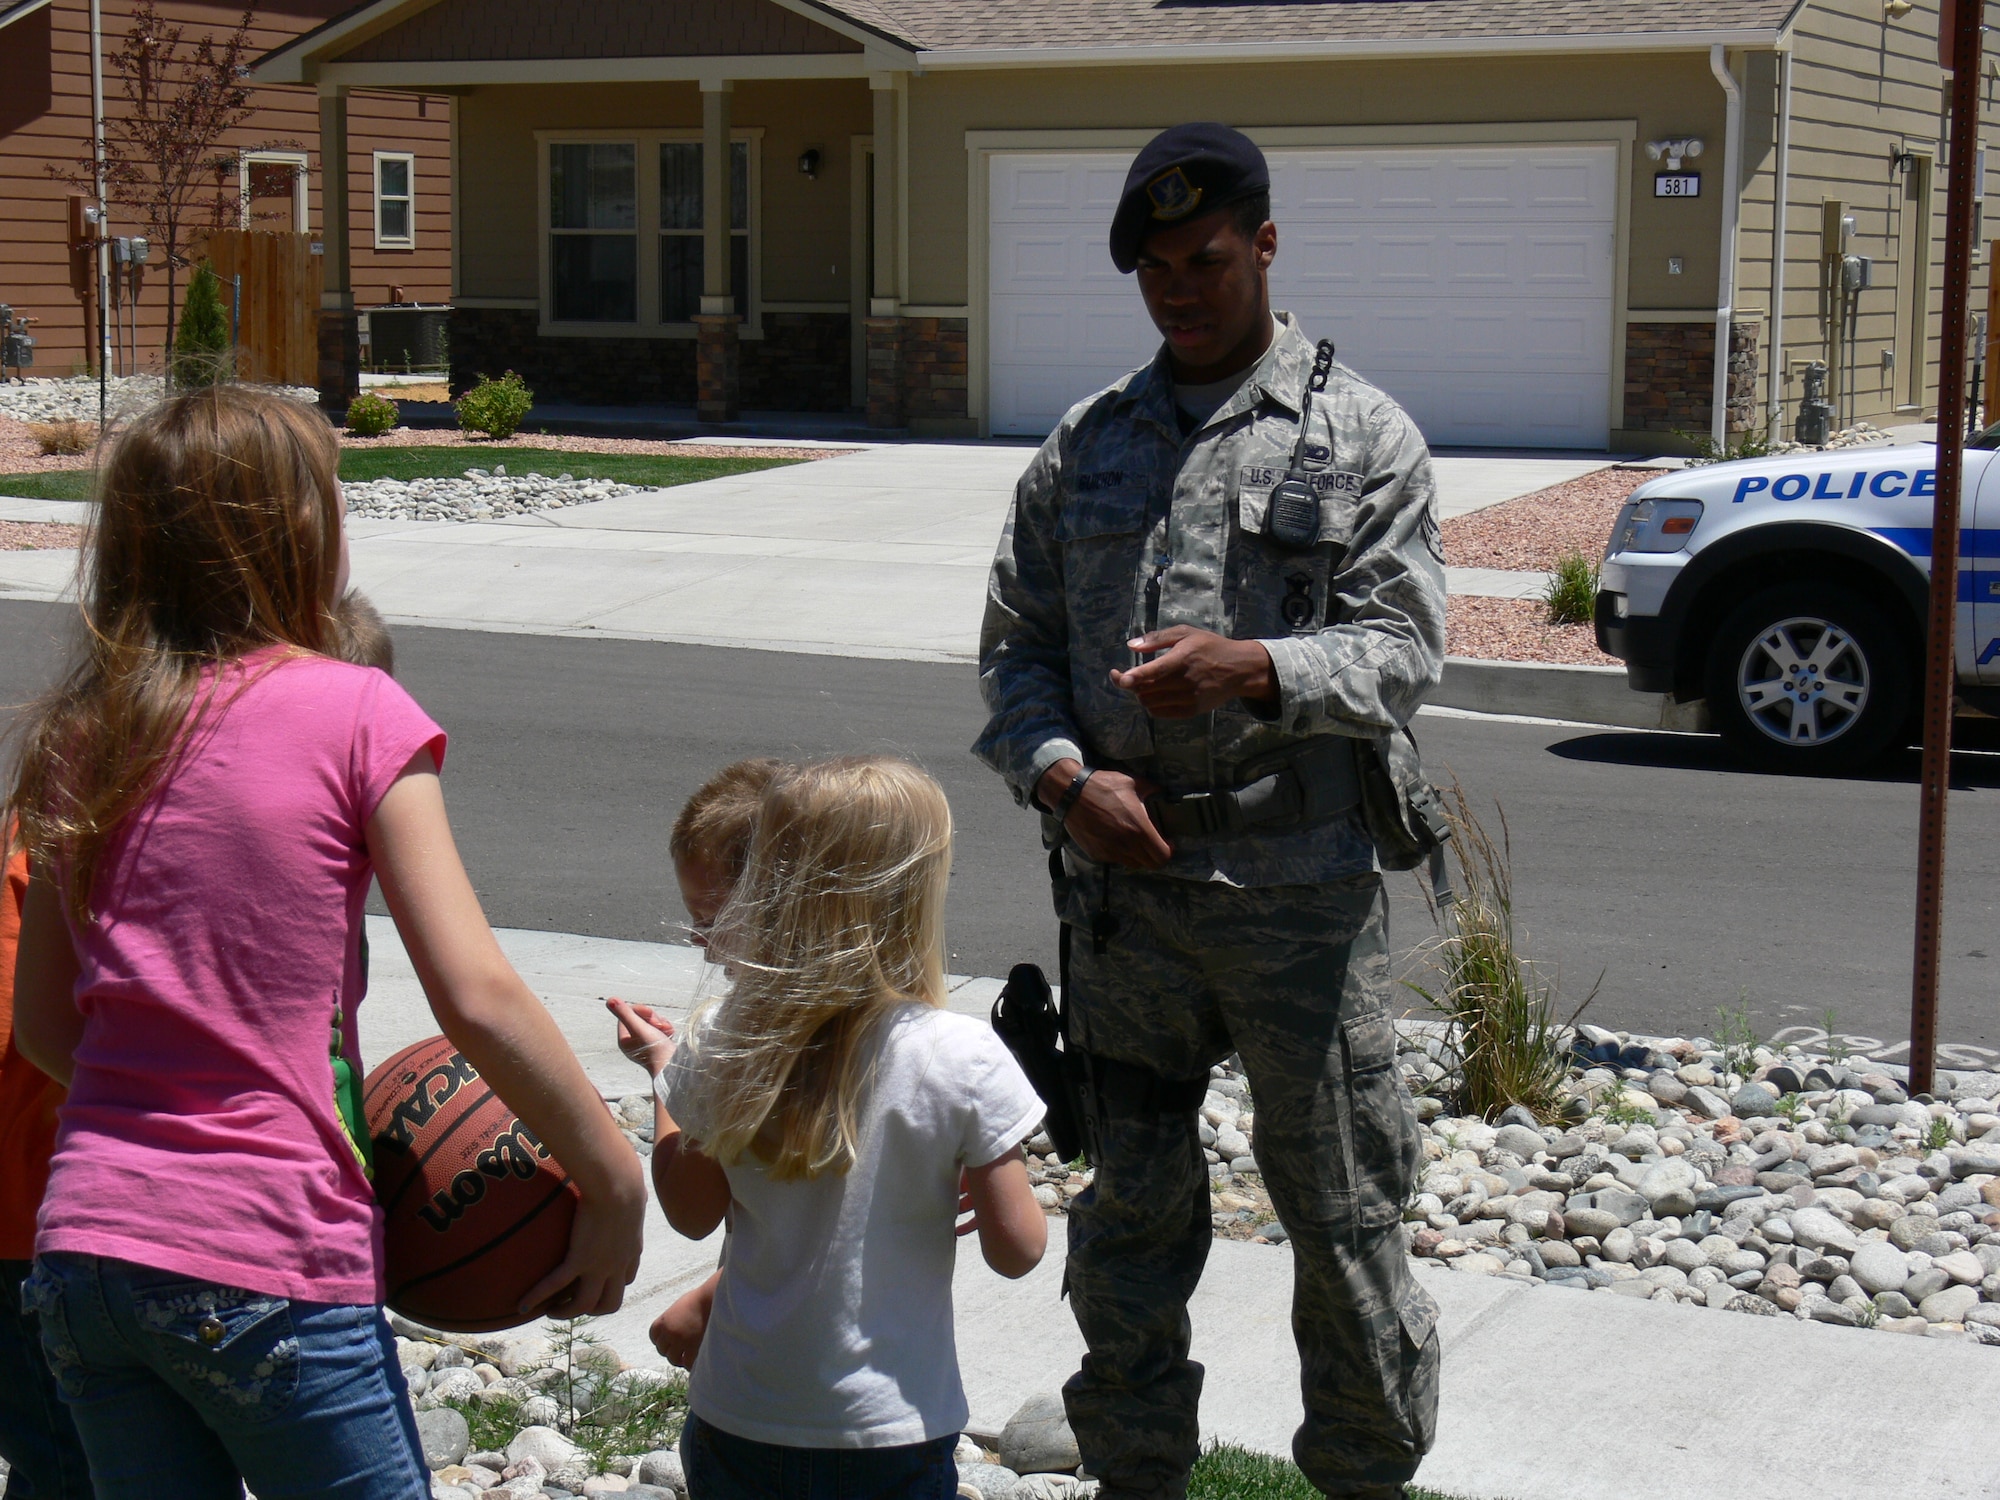 Senior Airman R. Jamal Guichon, 21st Security Forces Squadron, stops to talk with Peterson Air Force Base housing residents June 15. Residents have likely noticed an increased presence of security forces. The new neighborhood patrols are part of the 21st SFS integrated defense plan which calls for security forces to be more visible on base. (U.S. Air Force photo/Monica Mendoza)